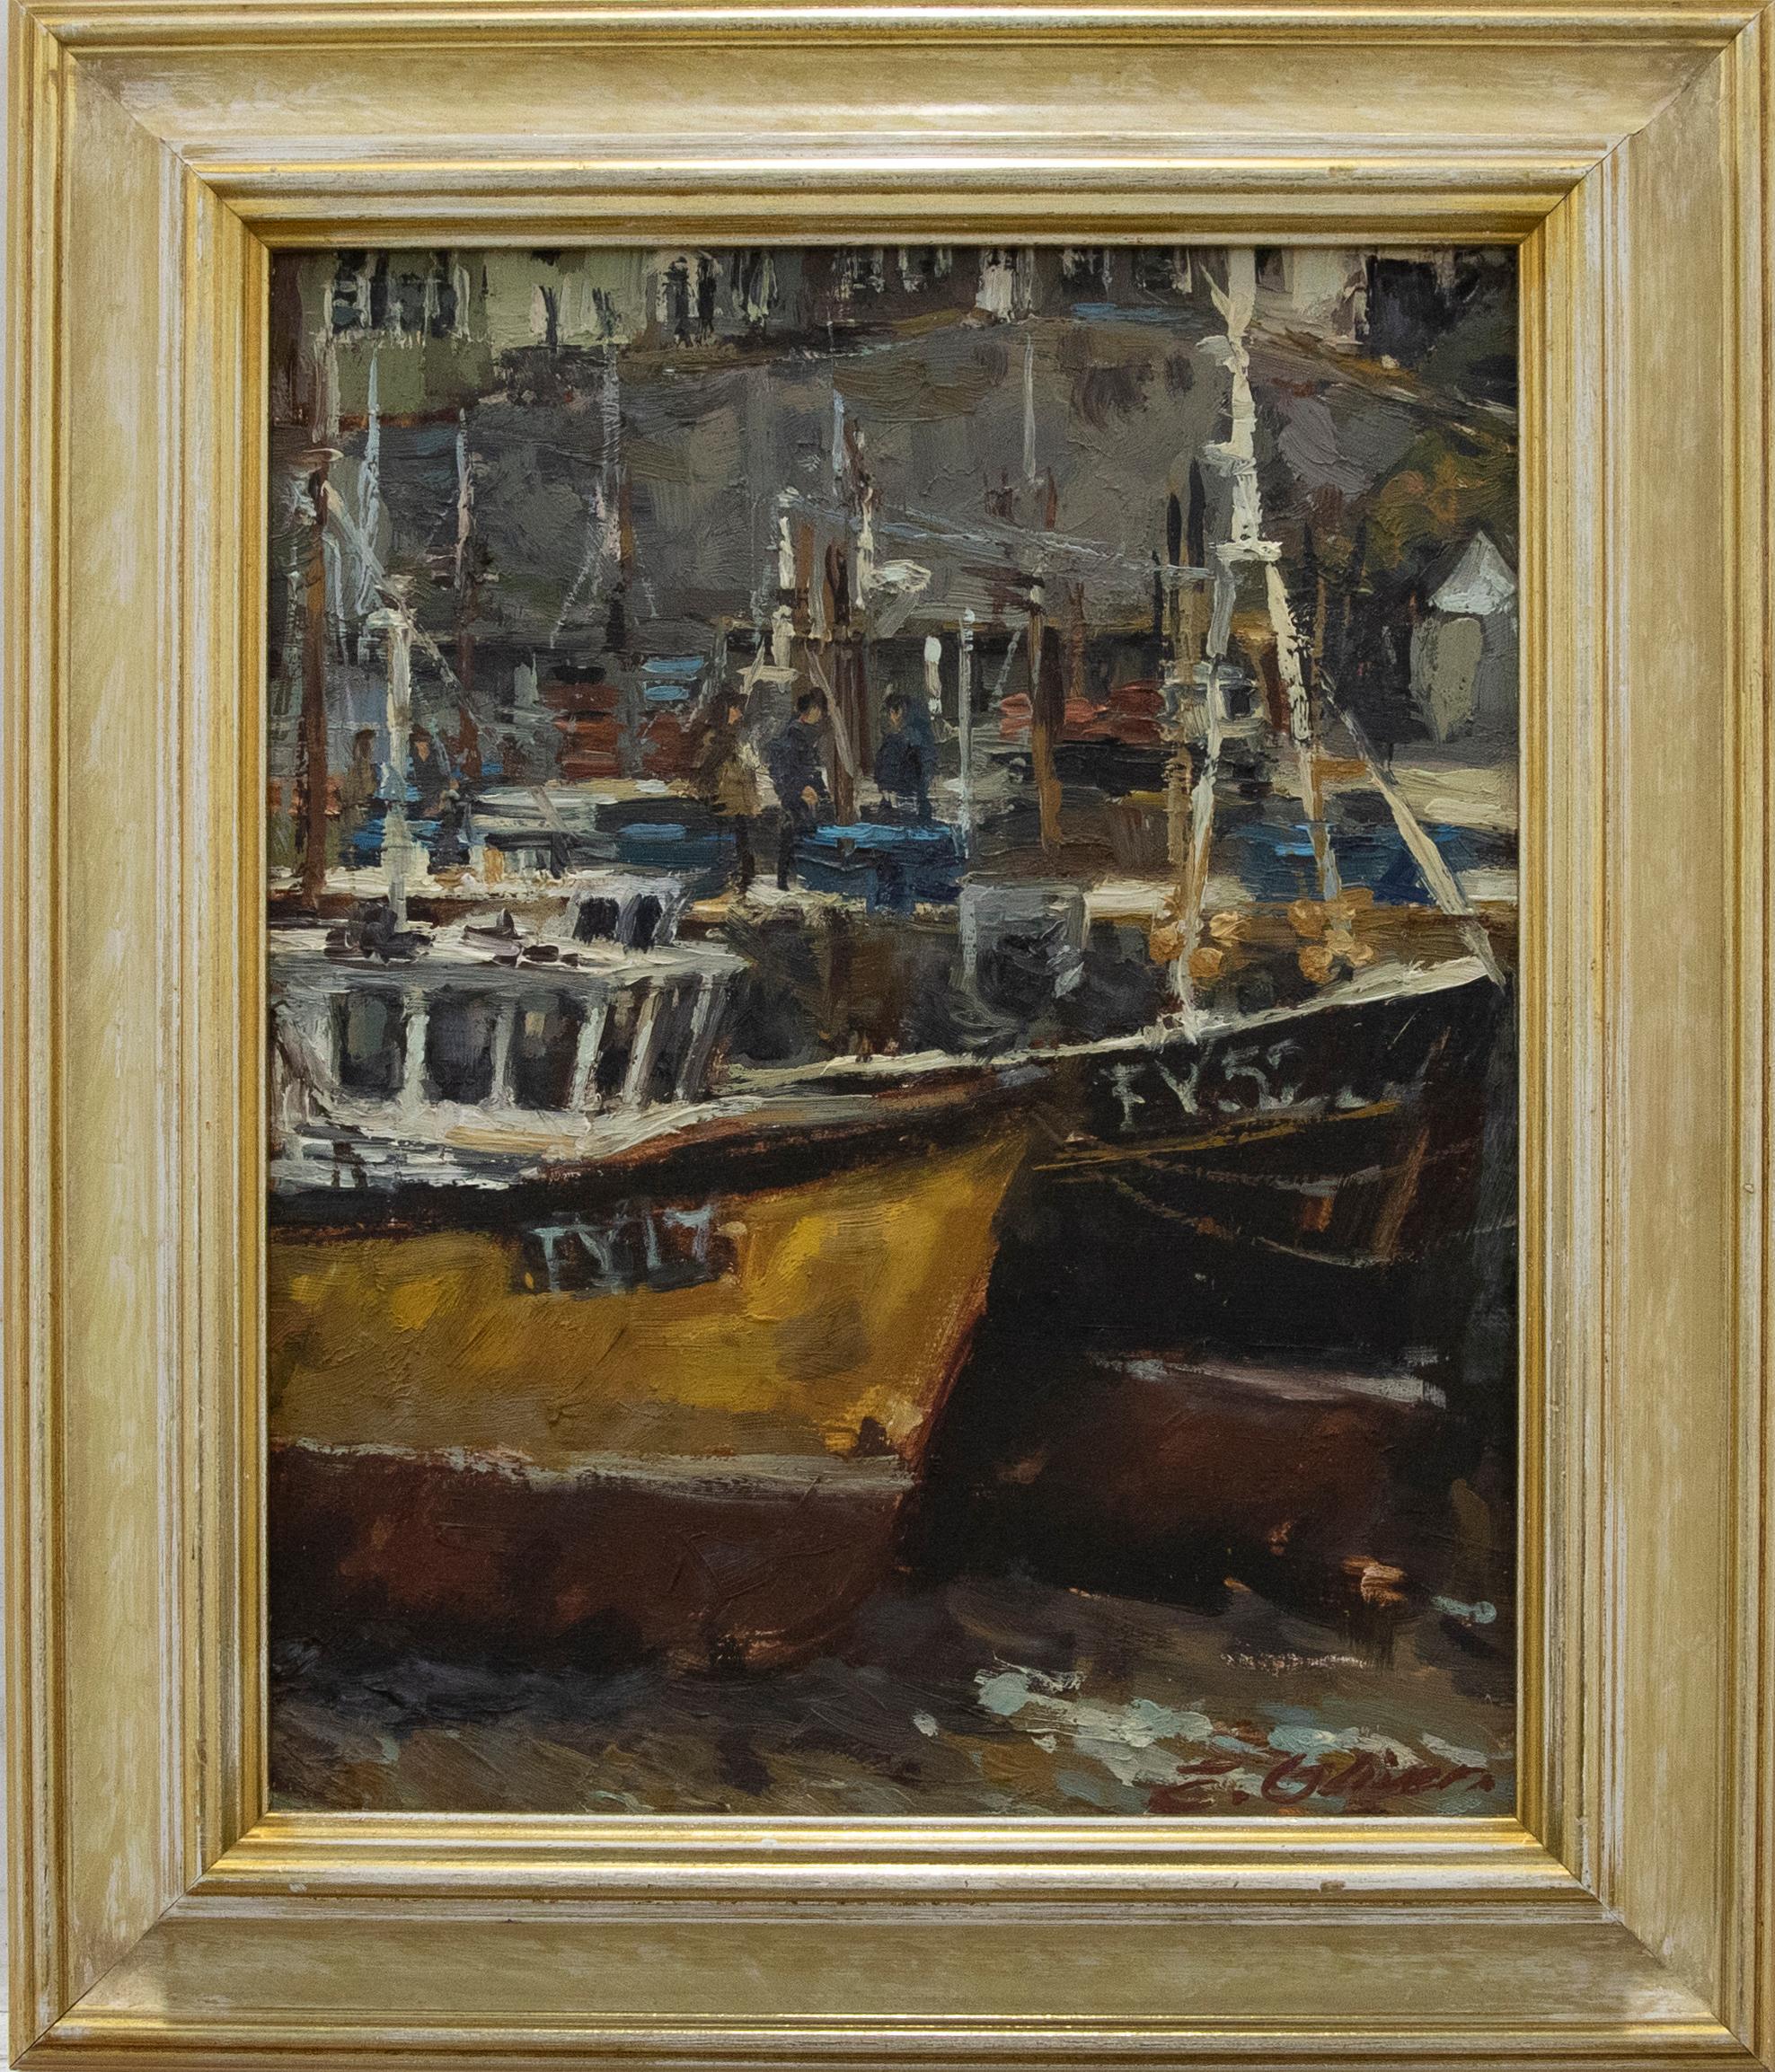 A wonderful impressionistic study of a Cornish harbour by the well listed artist Ernest Oliver. The scene depicts a focused view of two large fishing boats beached in a harbour at low tide. The body of the boats look impressive from this angle,